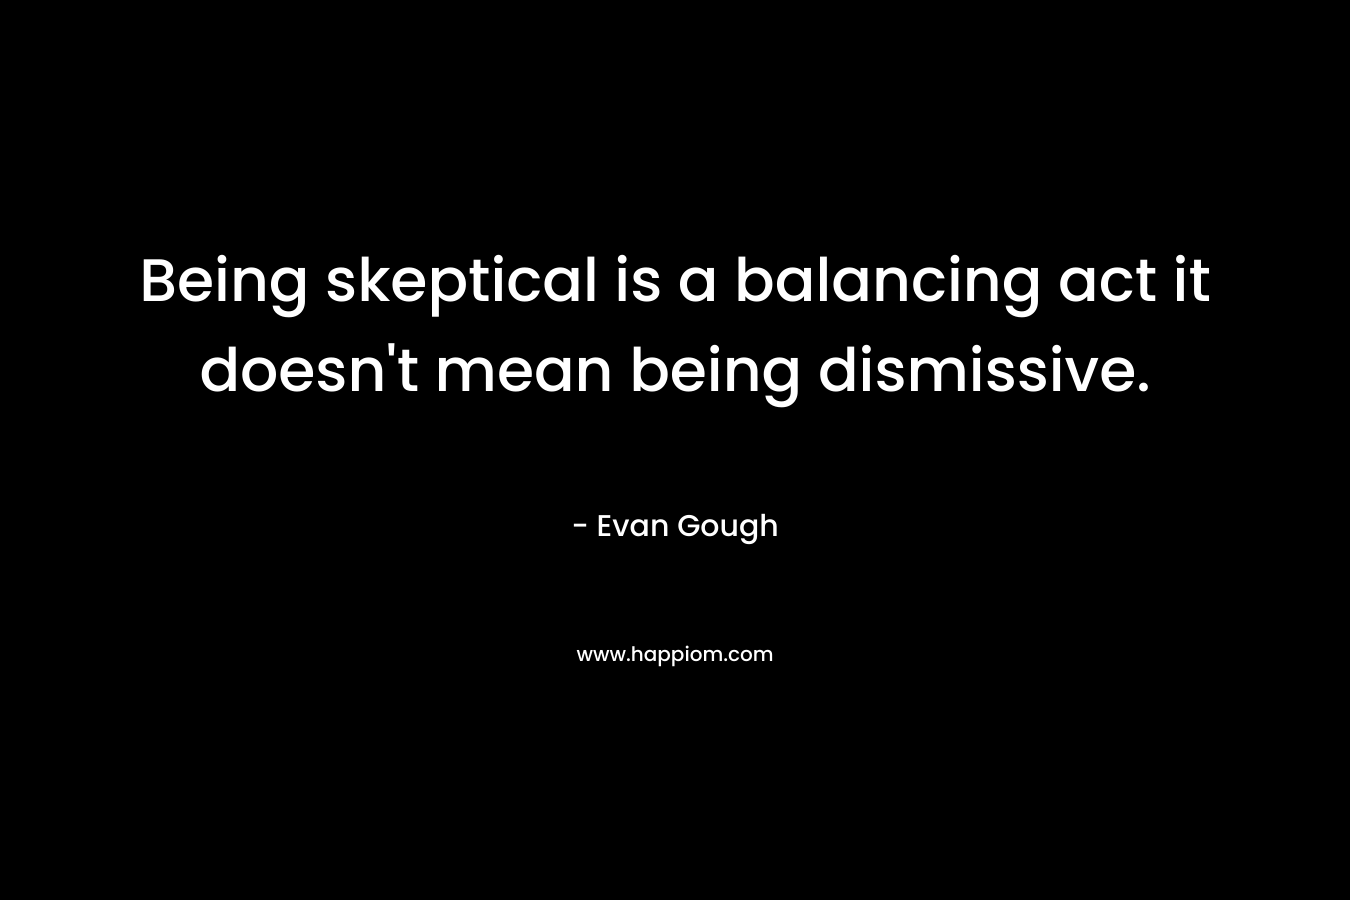 Being skeptical is a balancing act it doesn't mean being dismissive.